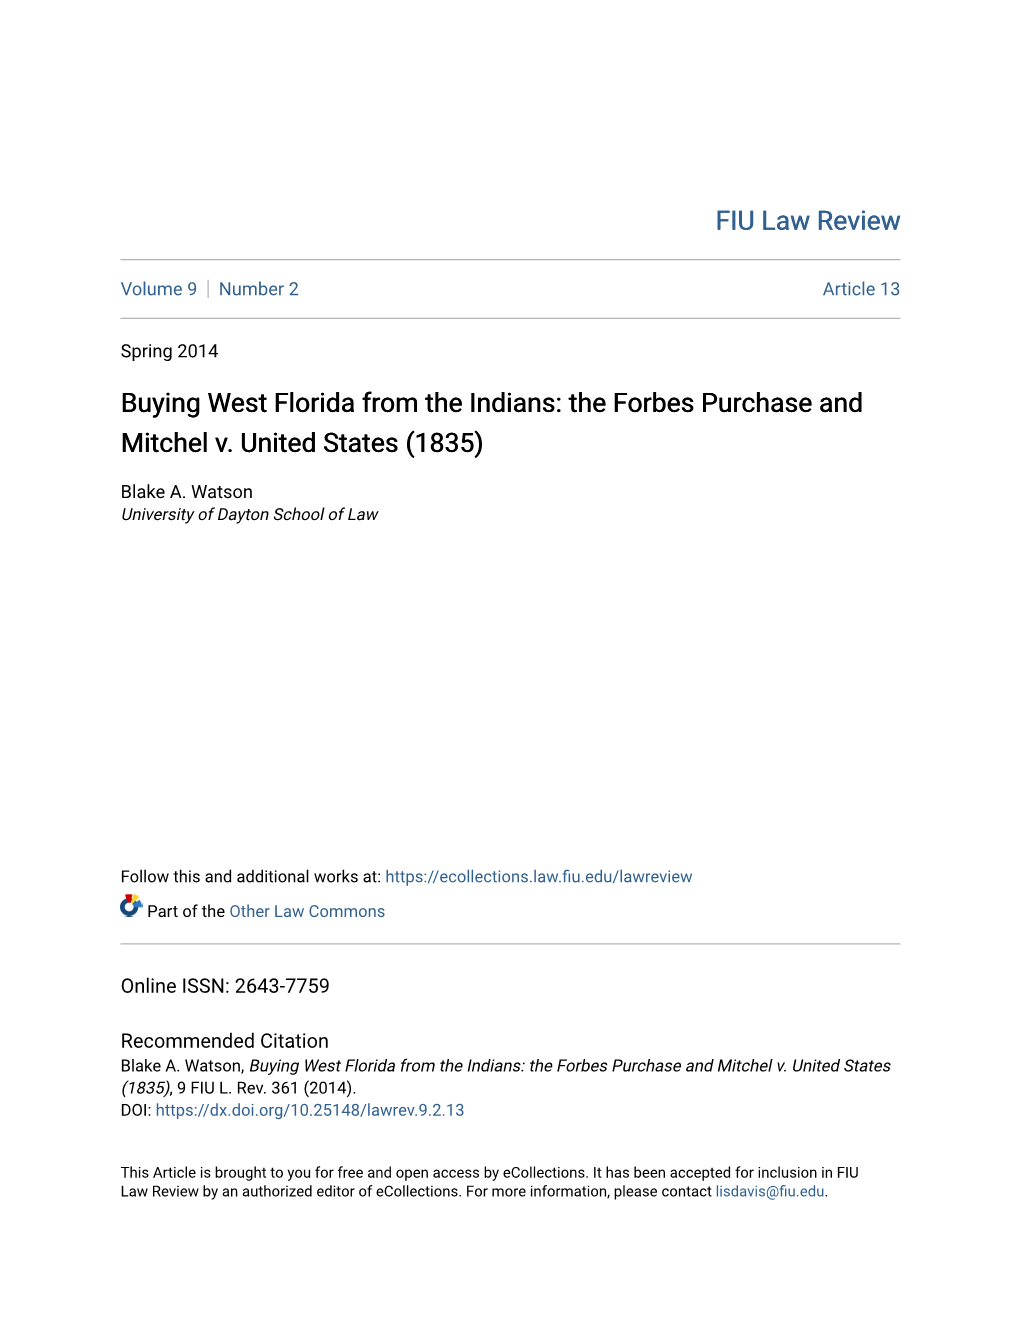 Buying West Florida from the Indians: the Forbes Purchase and Mitchel V